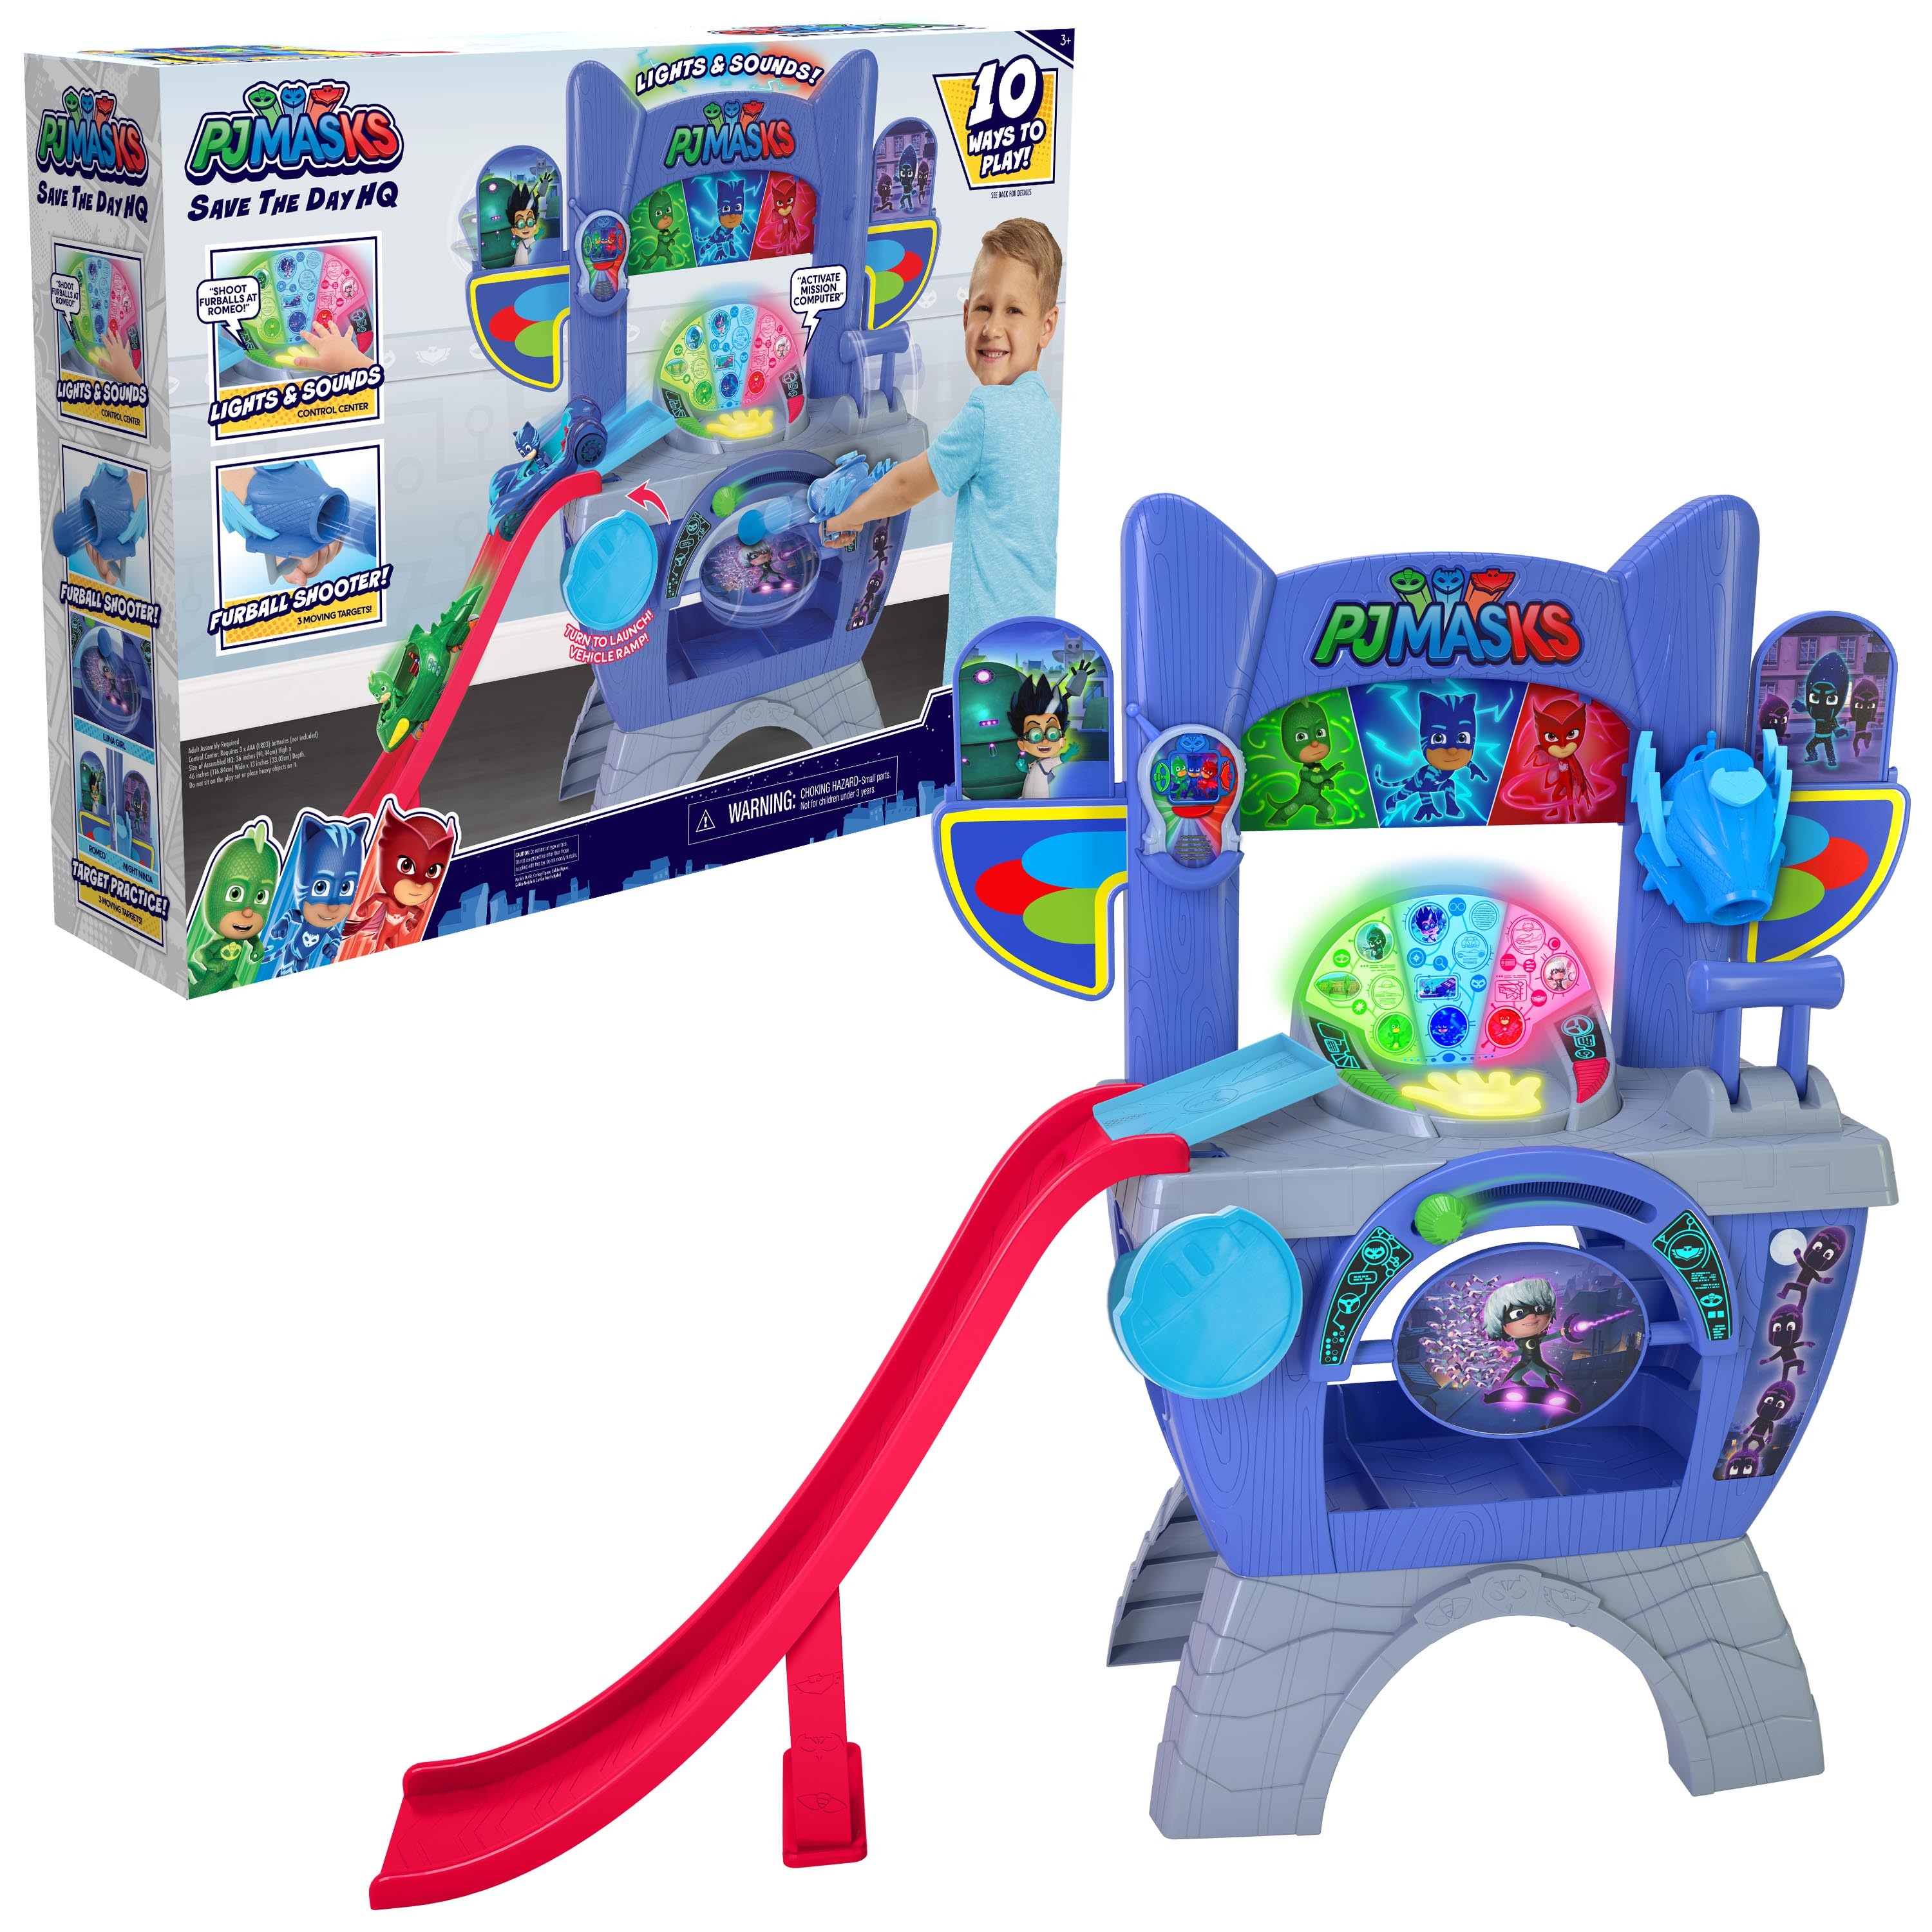 PJ Masks Saves the Day HQ 36-Inch Tall Interactive Playset with Lights and Sounds,  Kids Toys for Ages 3 Up, Gifts and Presents - image 1 of 9